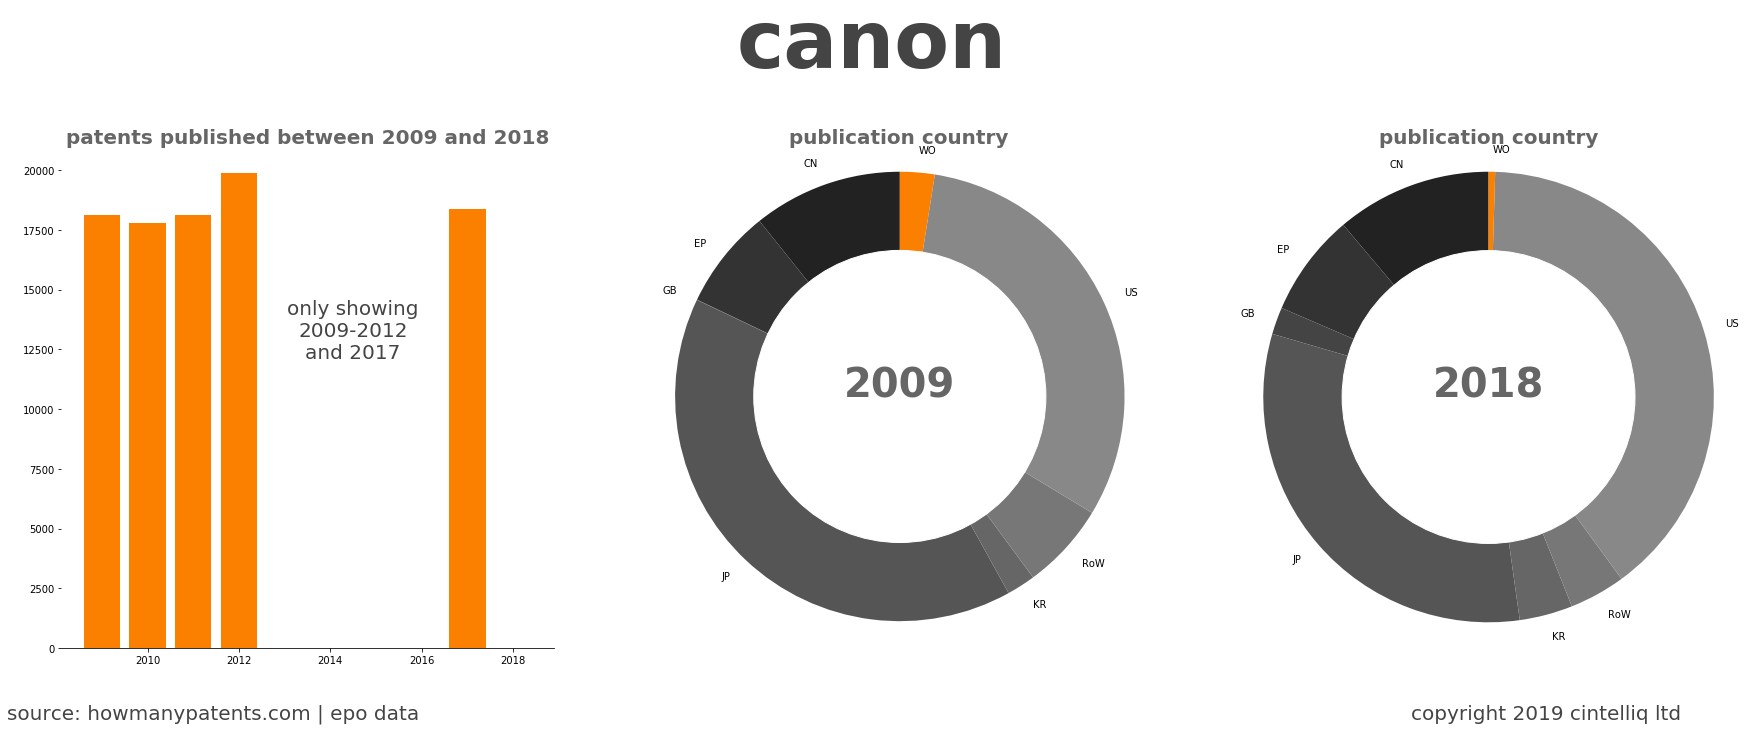 summary of patents for Canon